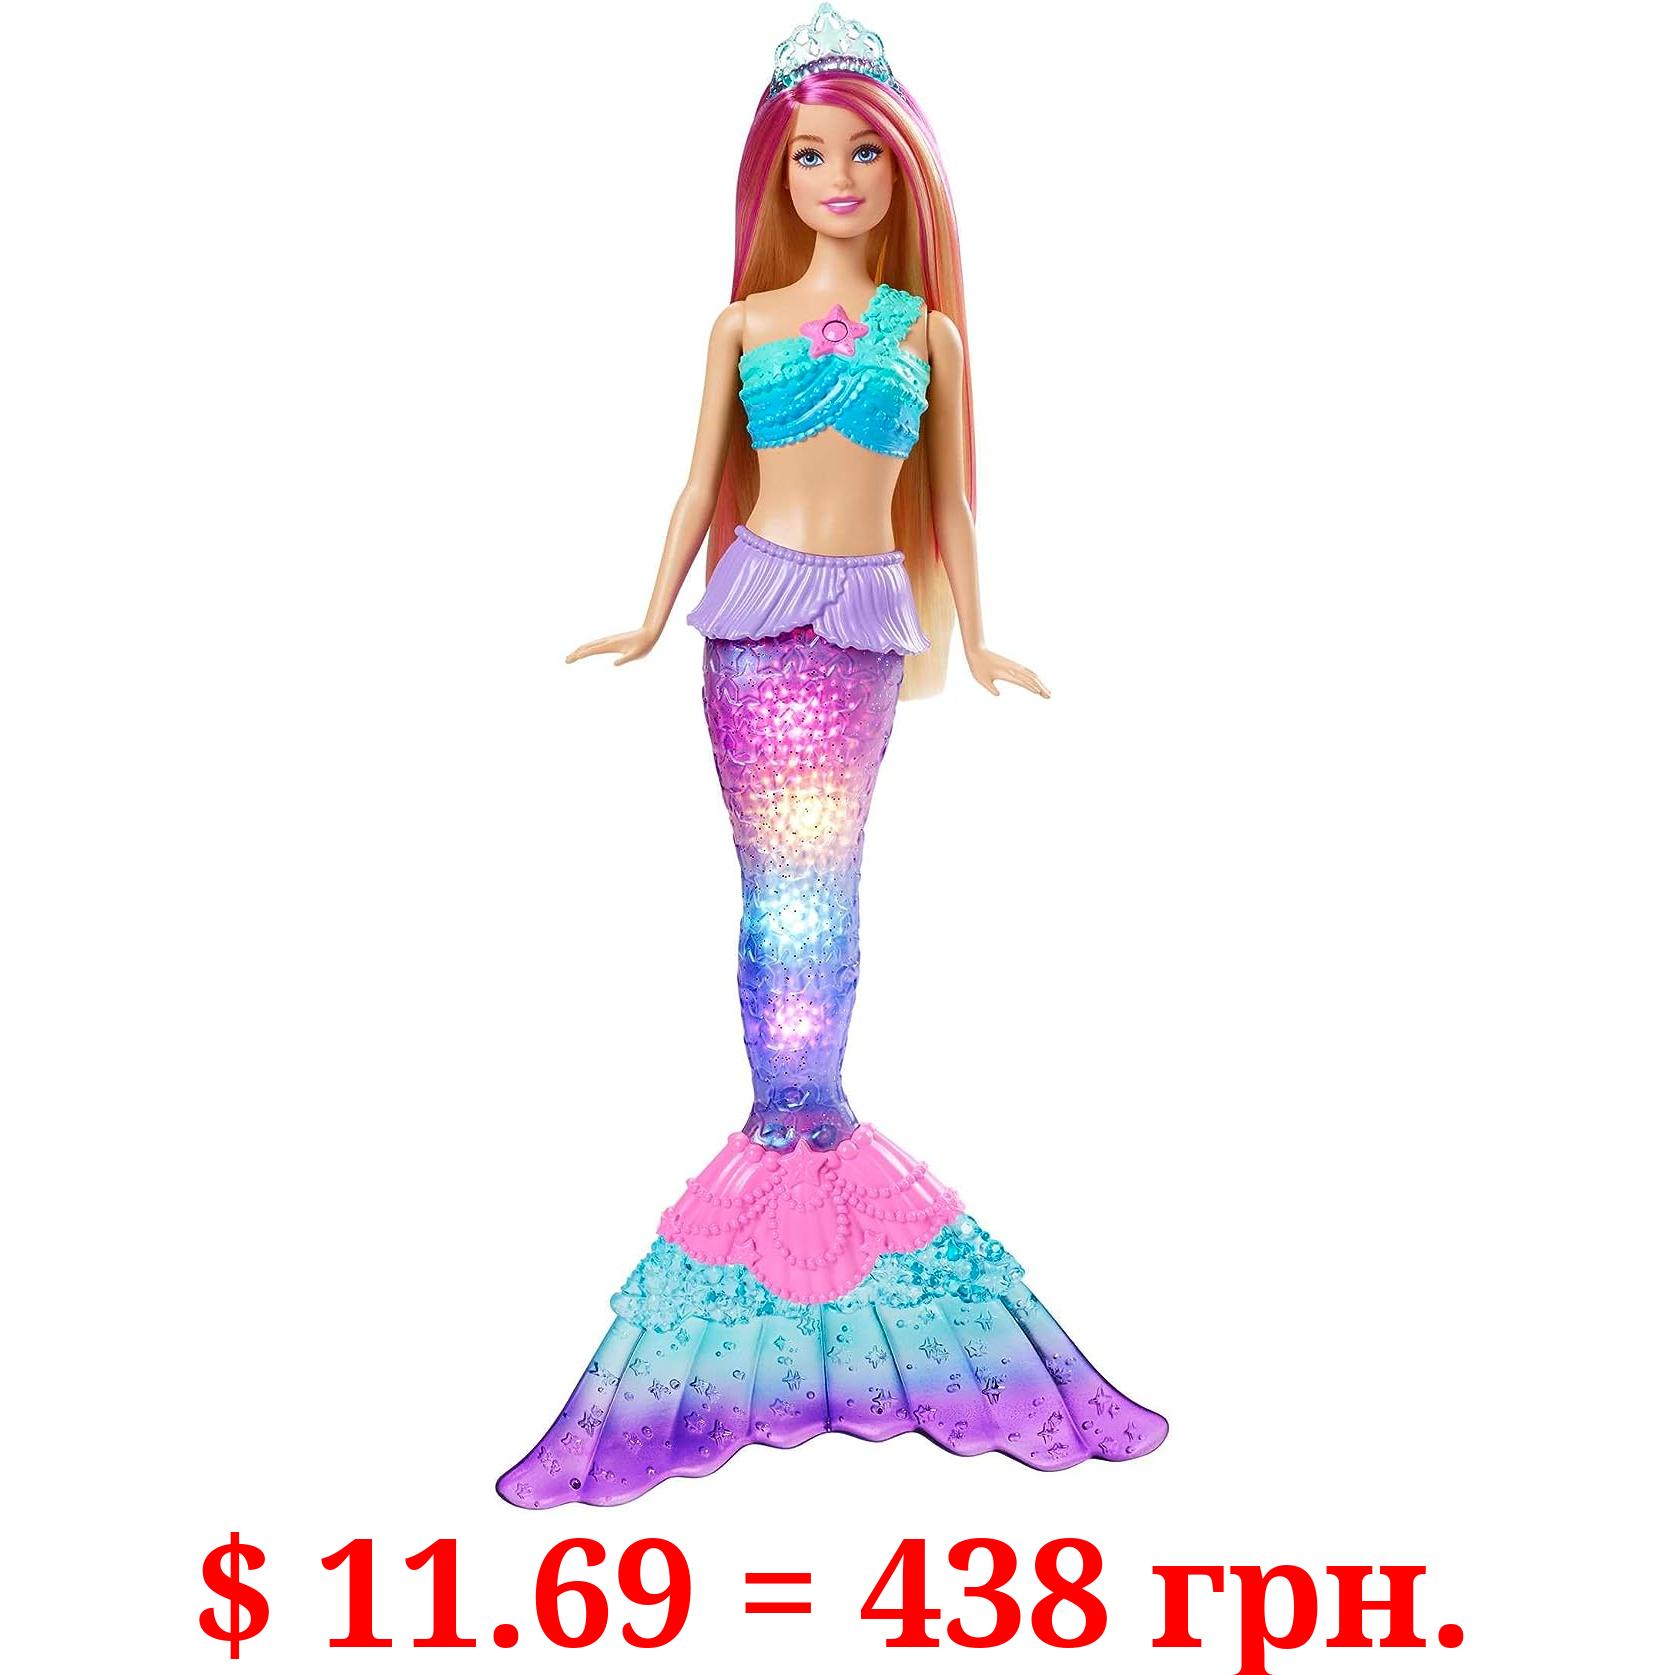 Barbie Dreamtopia Doll, Mermaid Toy with Water-Activated Light-Up Tail, Pink-Streaked Hair & 4 Colorful Light Shows , 12 inches